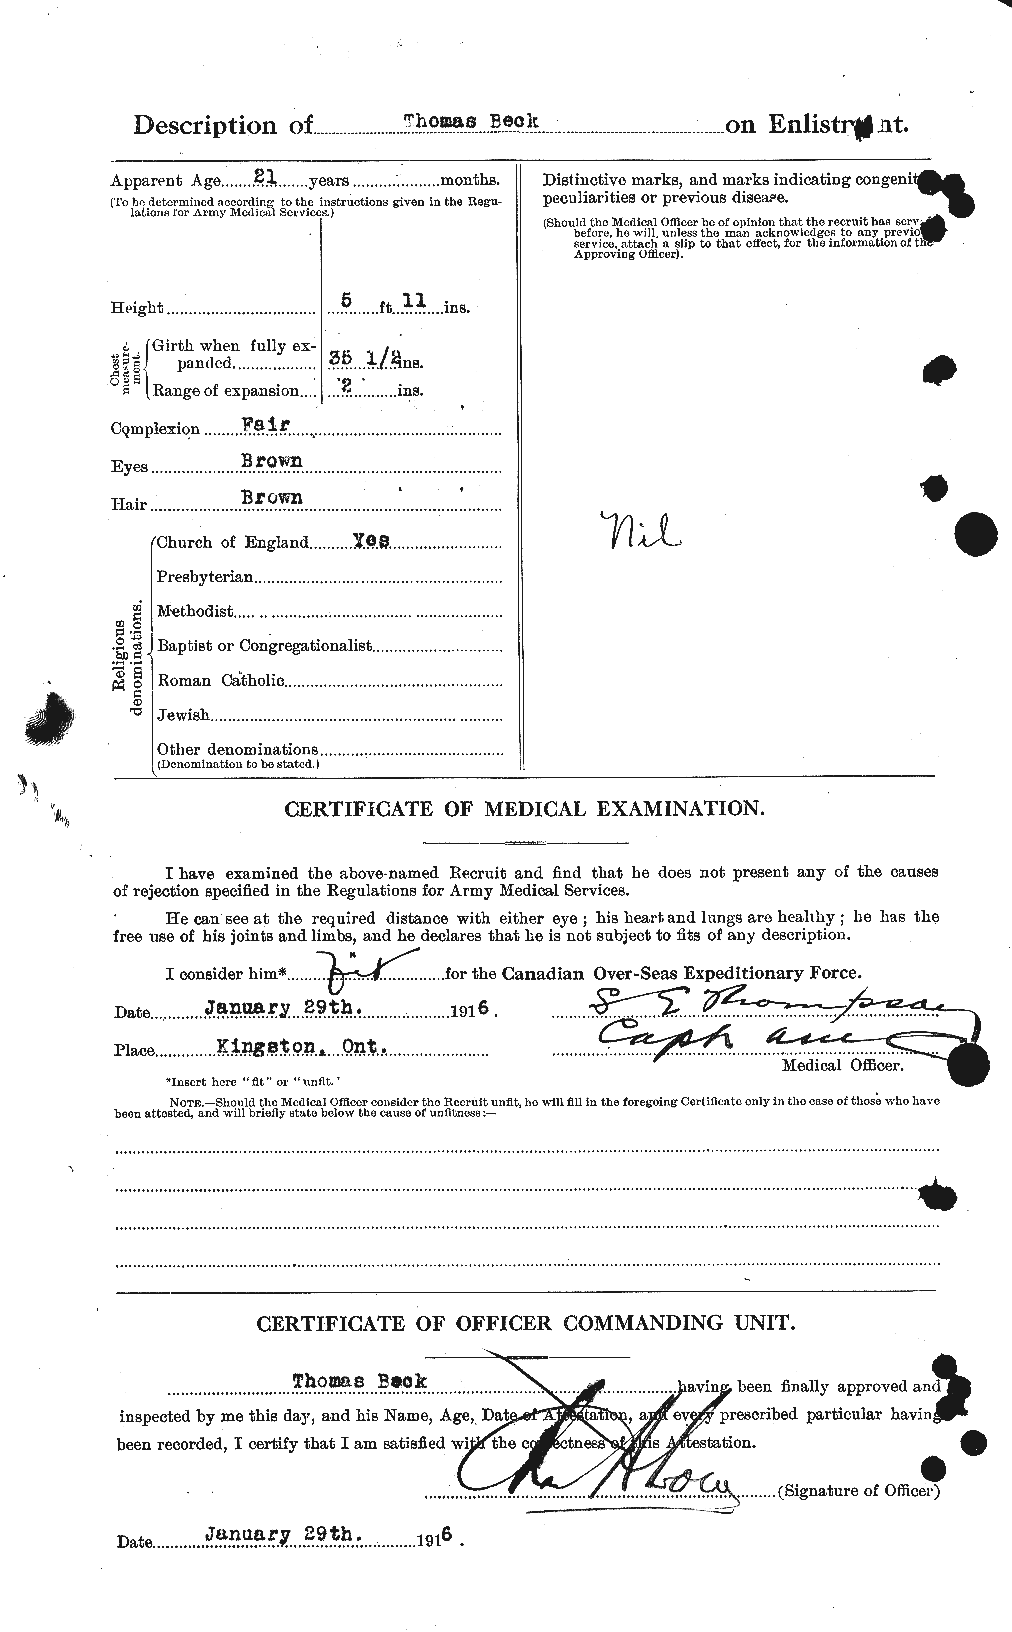 Personnel Records of the First World War - CEF 232228b